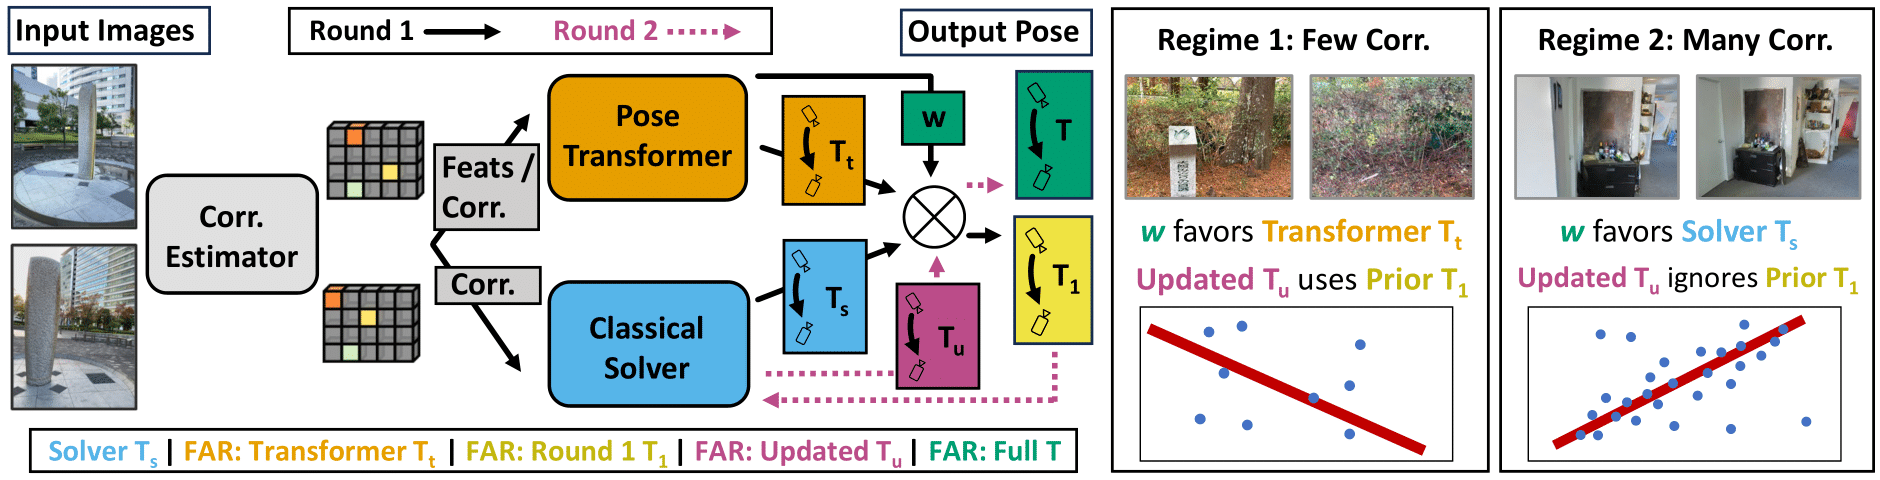 Camera pose estimation with aruco marker inaccuracy - Python - OpenCV